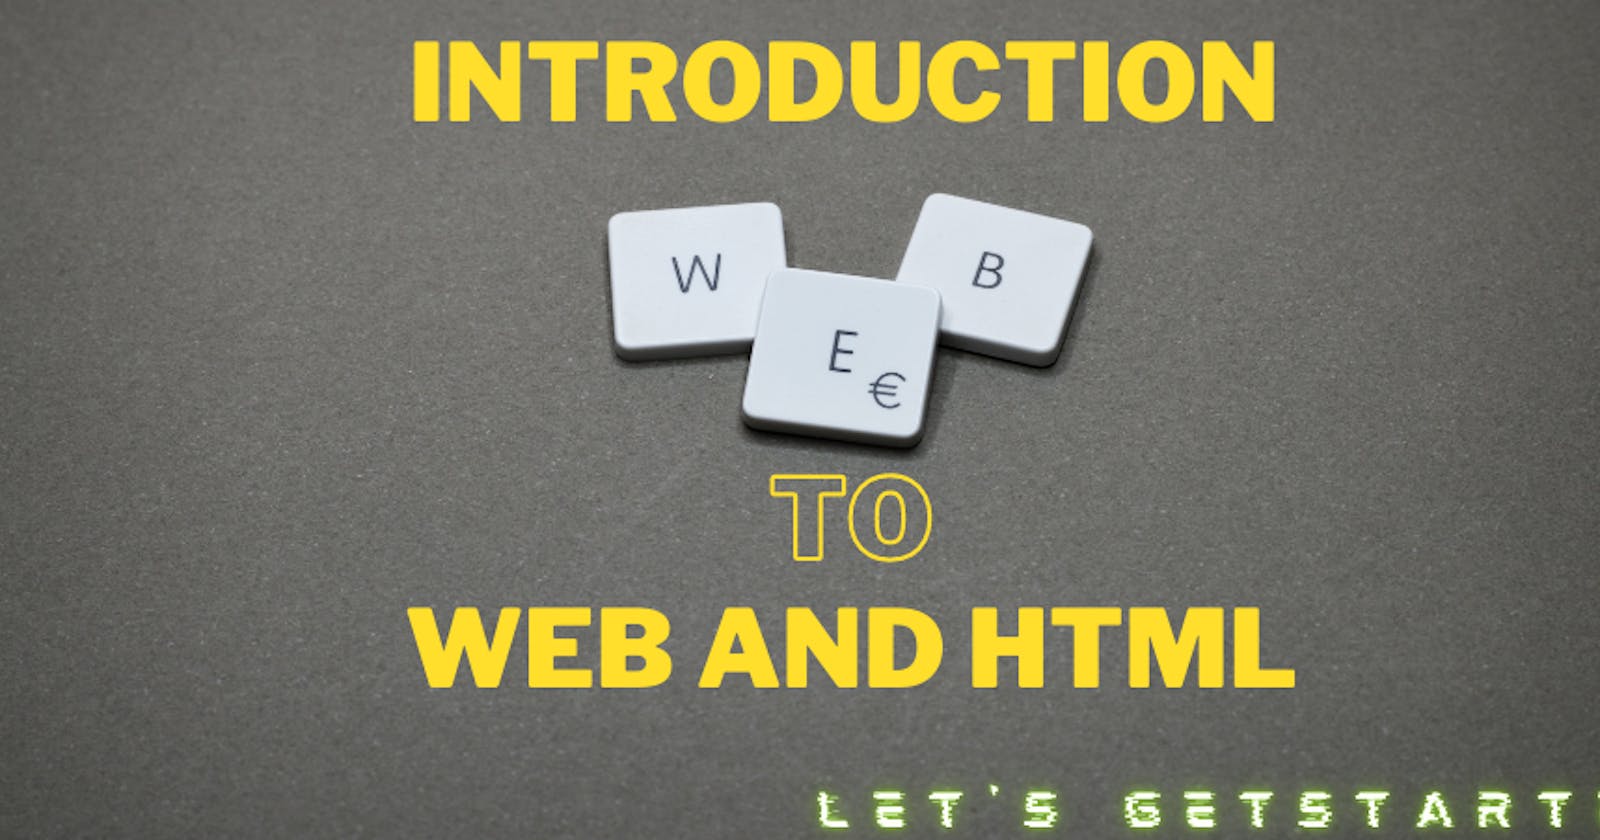 Introduction to web and HTML